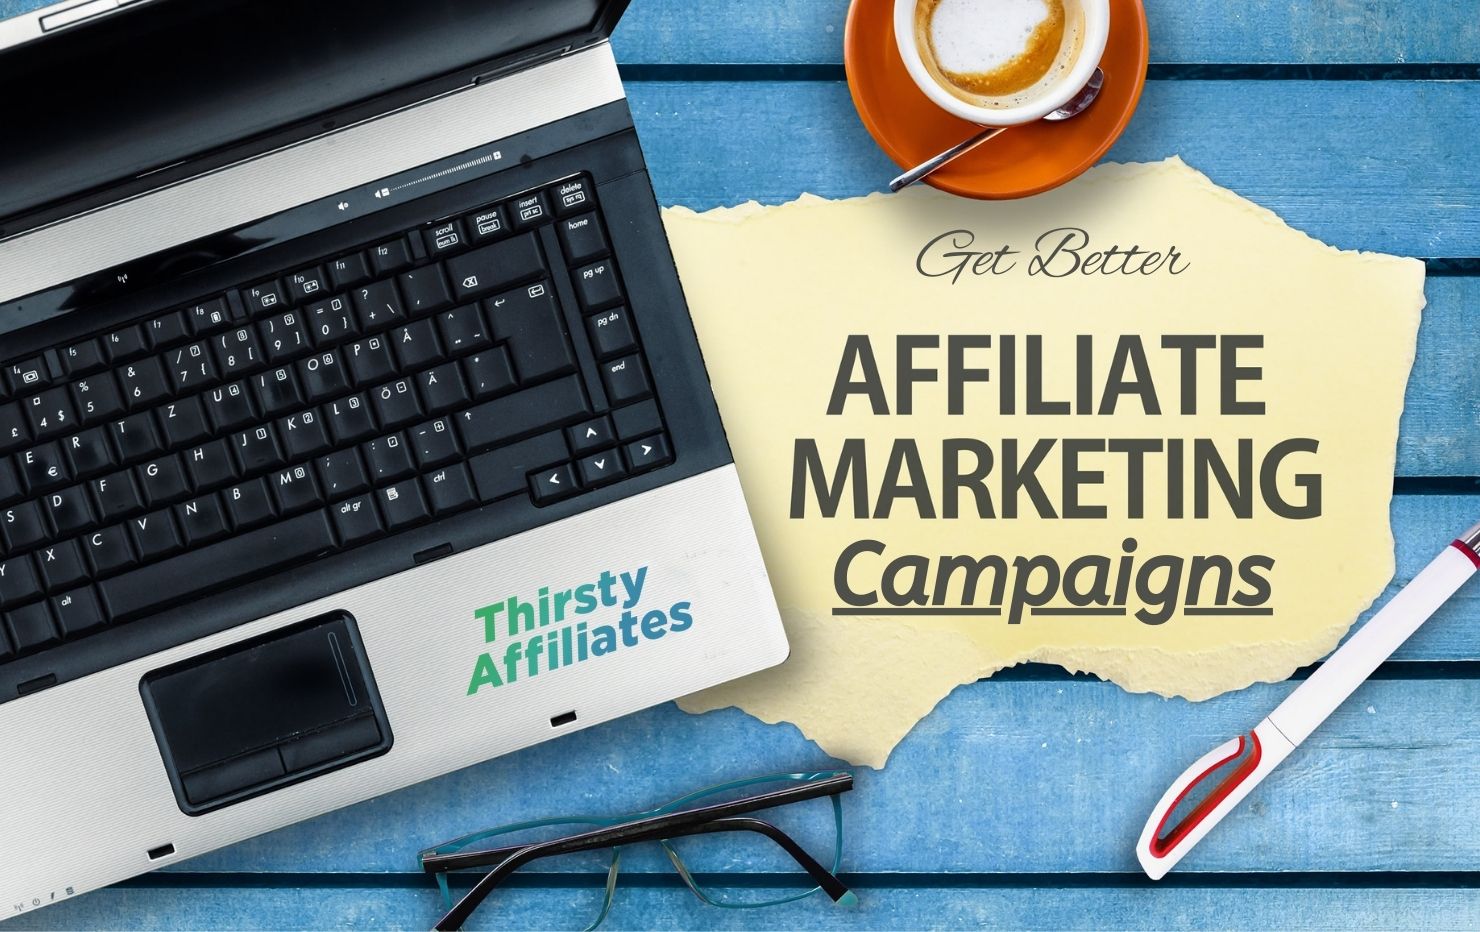 How to Build Better Affiliate Marketing Campaigns (6 Tips) – ThirstyAffiliates